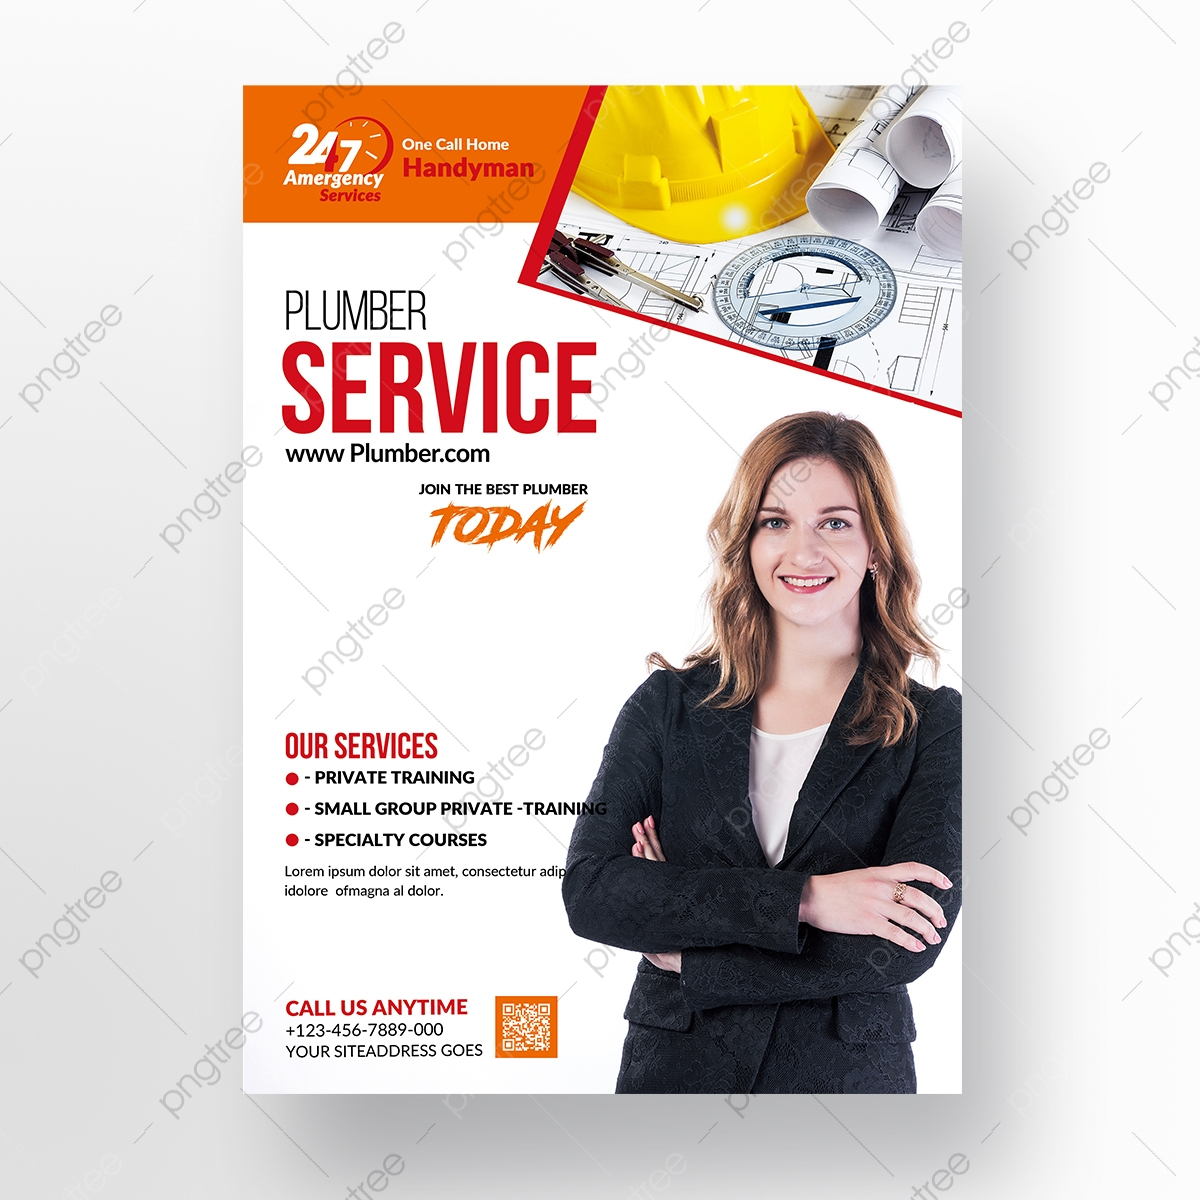 Plumber Service Flyers Template Download on Pngtree Intended For Plumbing Flyer Template For Plumbing Flyer Template